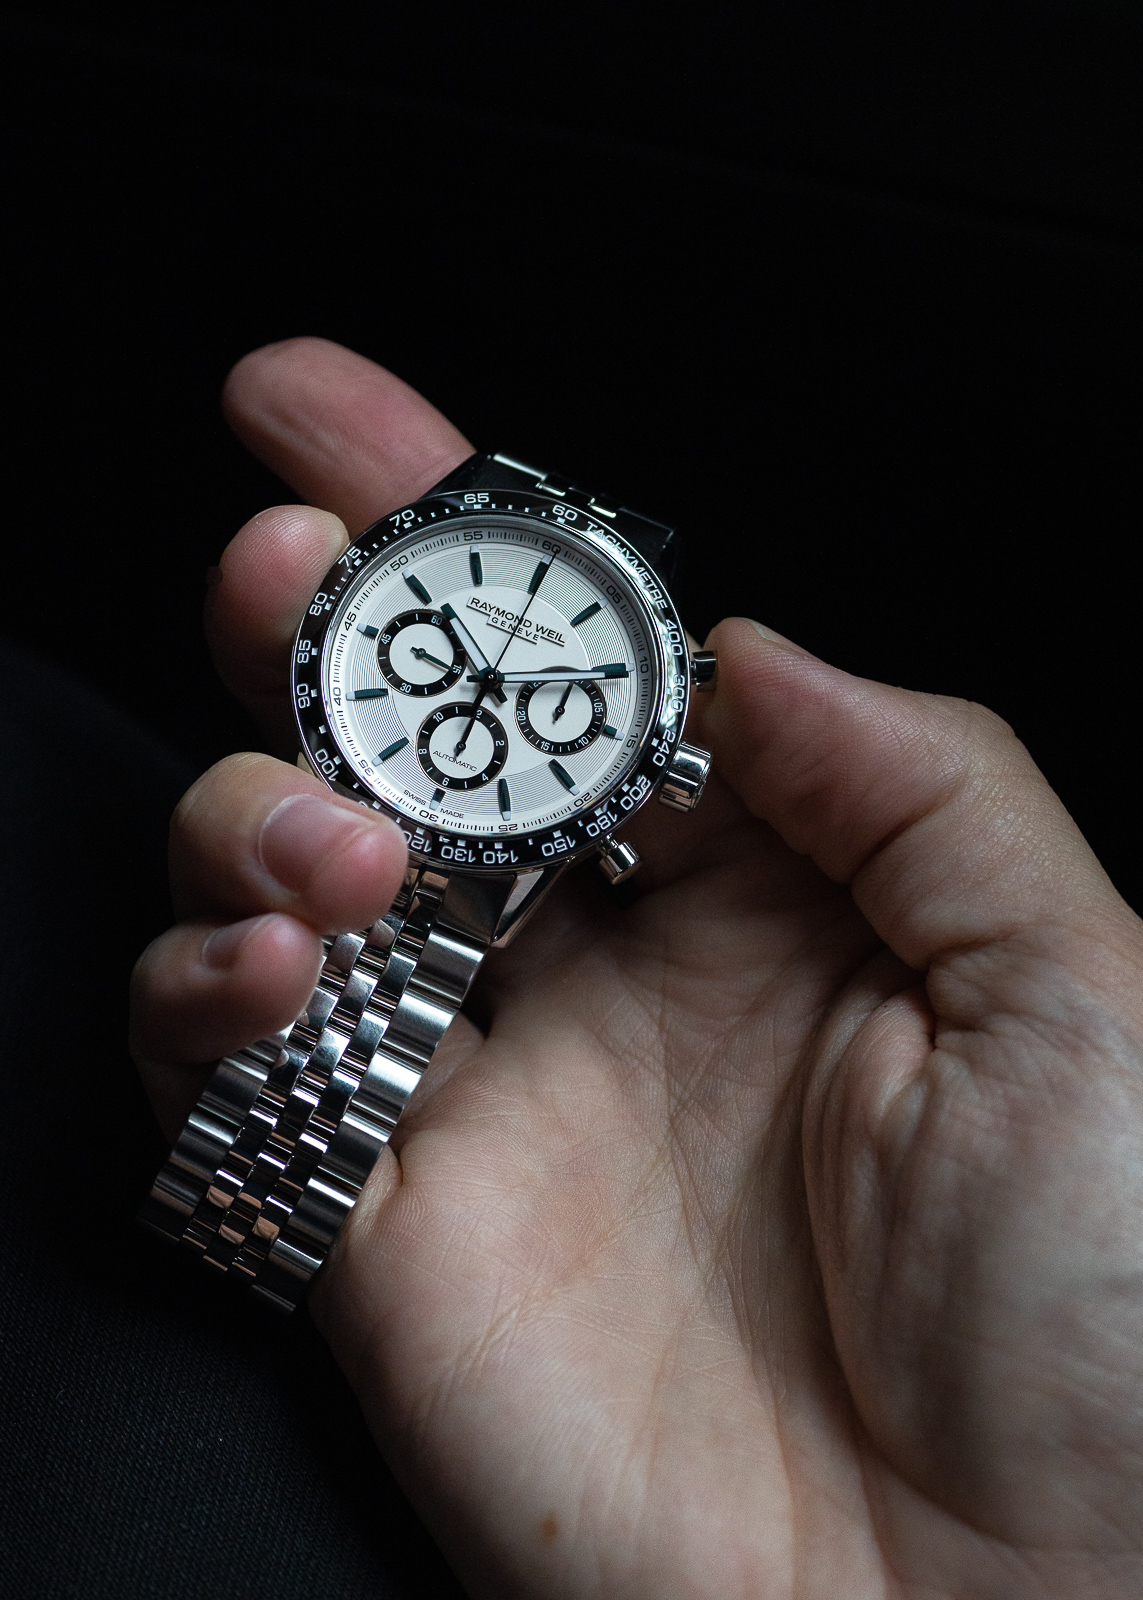 RAYMOND WEIL Freelancer Chronograph 7741: The Real Deal Without The Wait